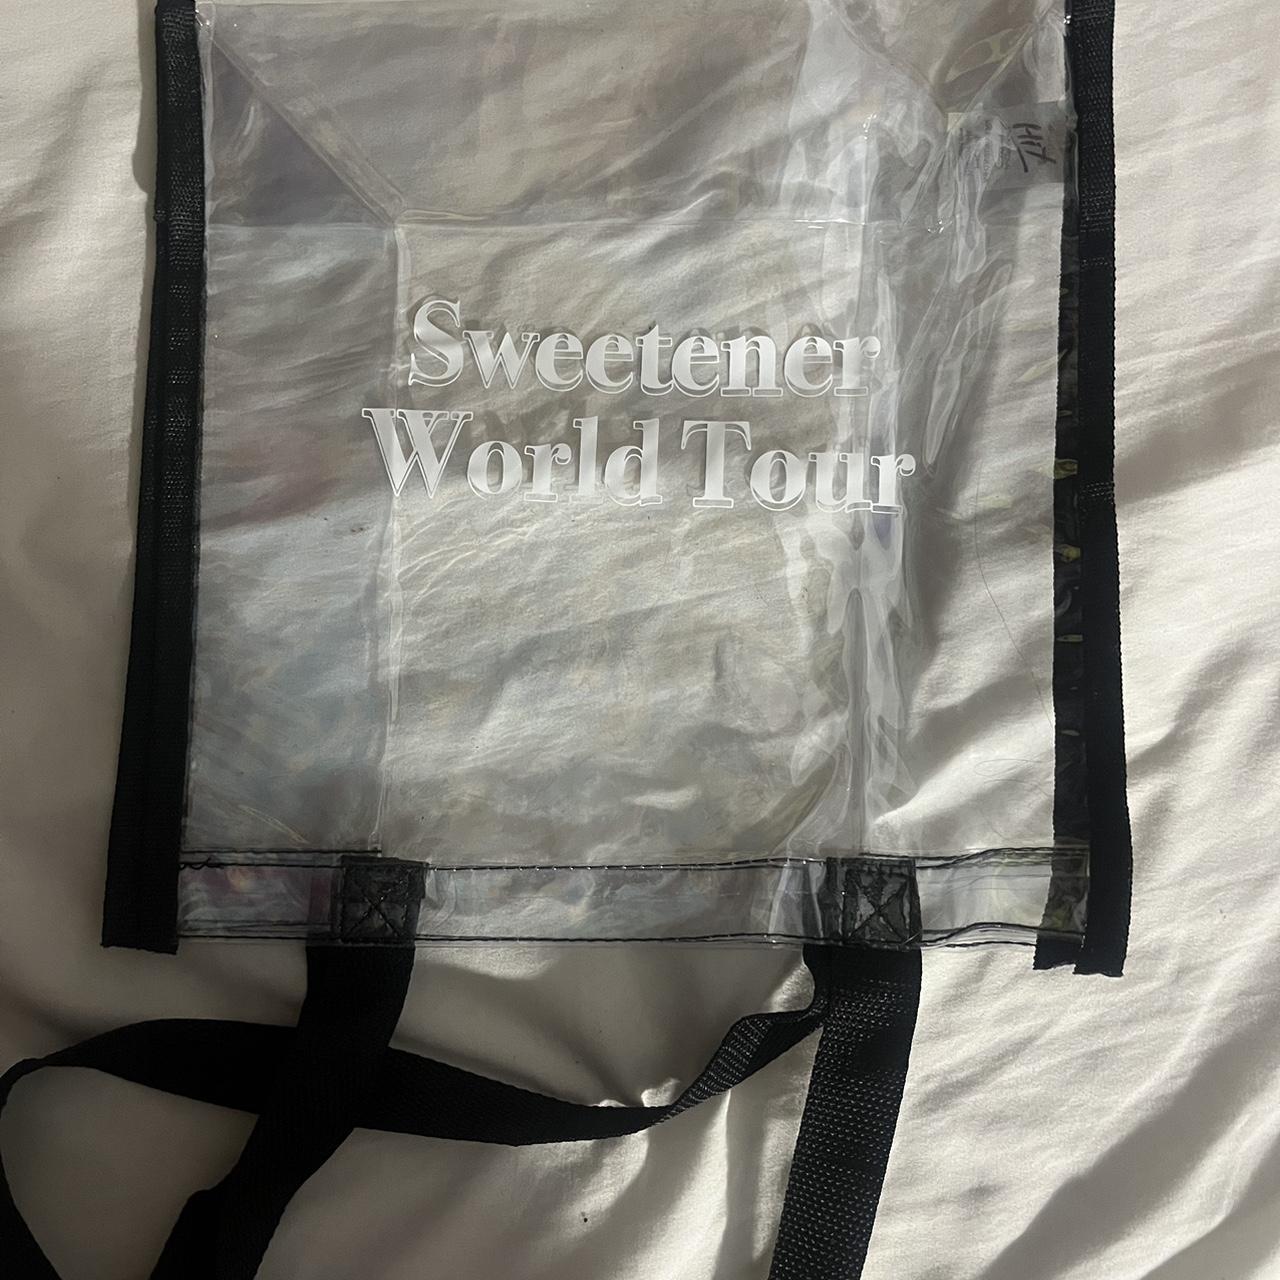 Clear bags only at Ariana Grande concert in Edmonton - Edmonton